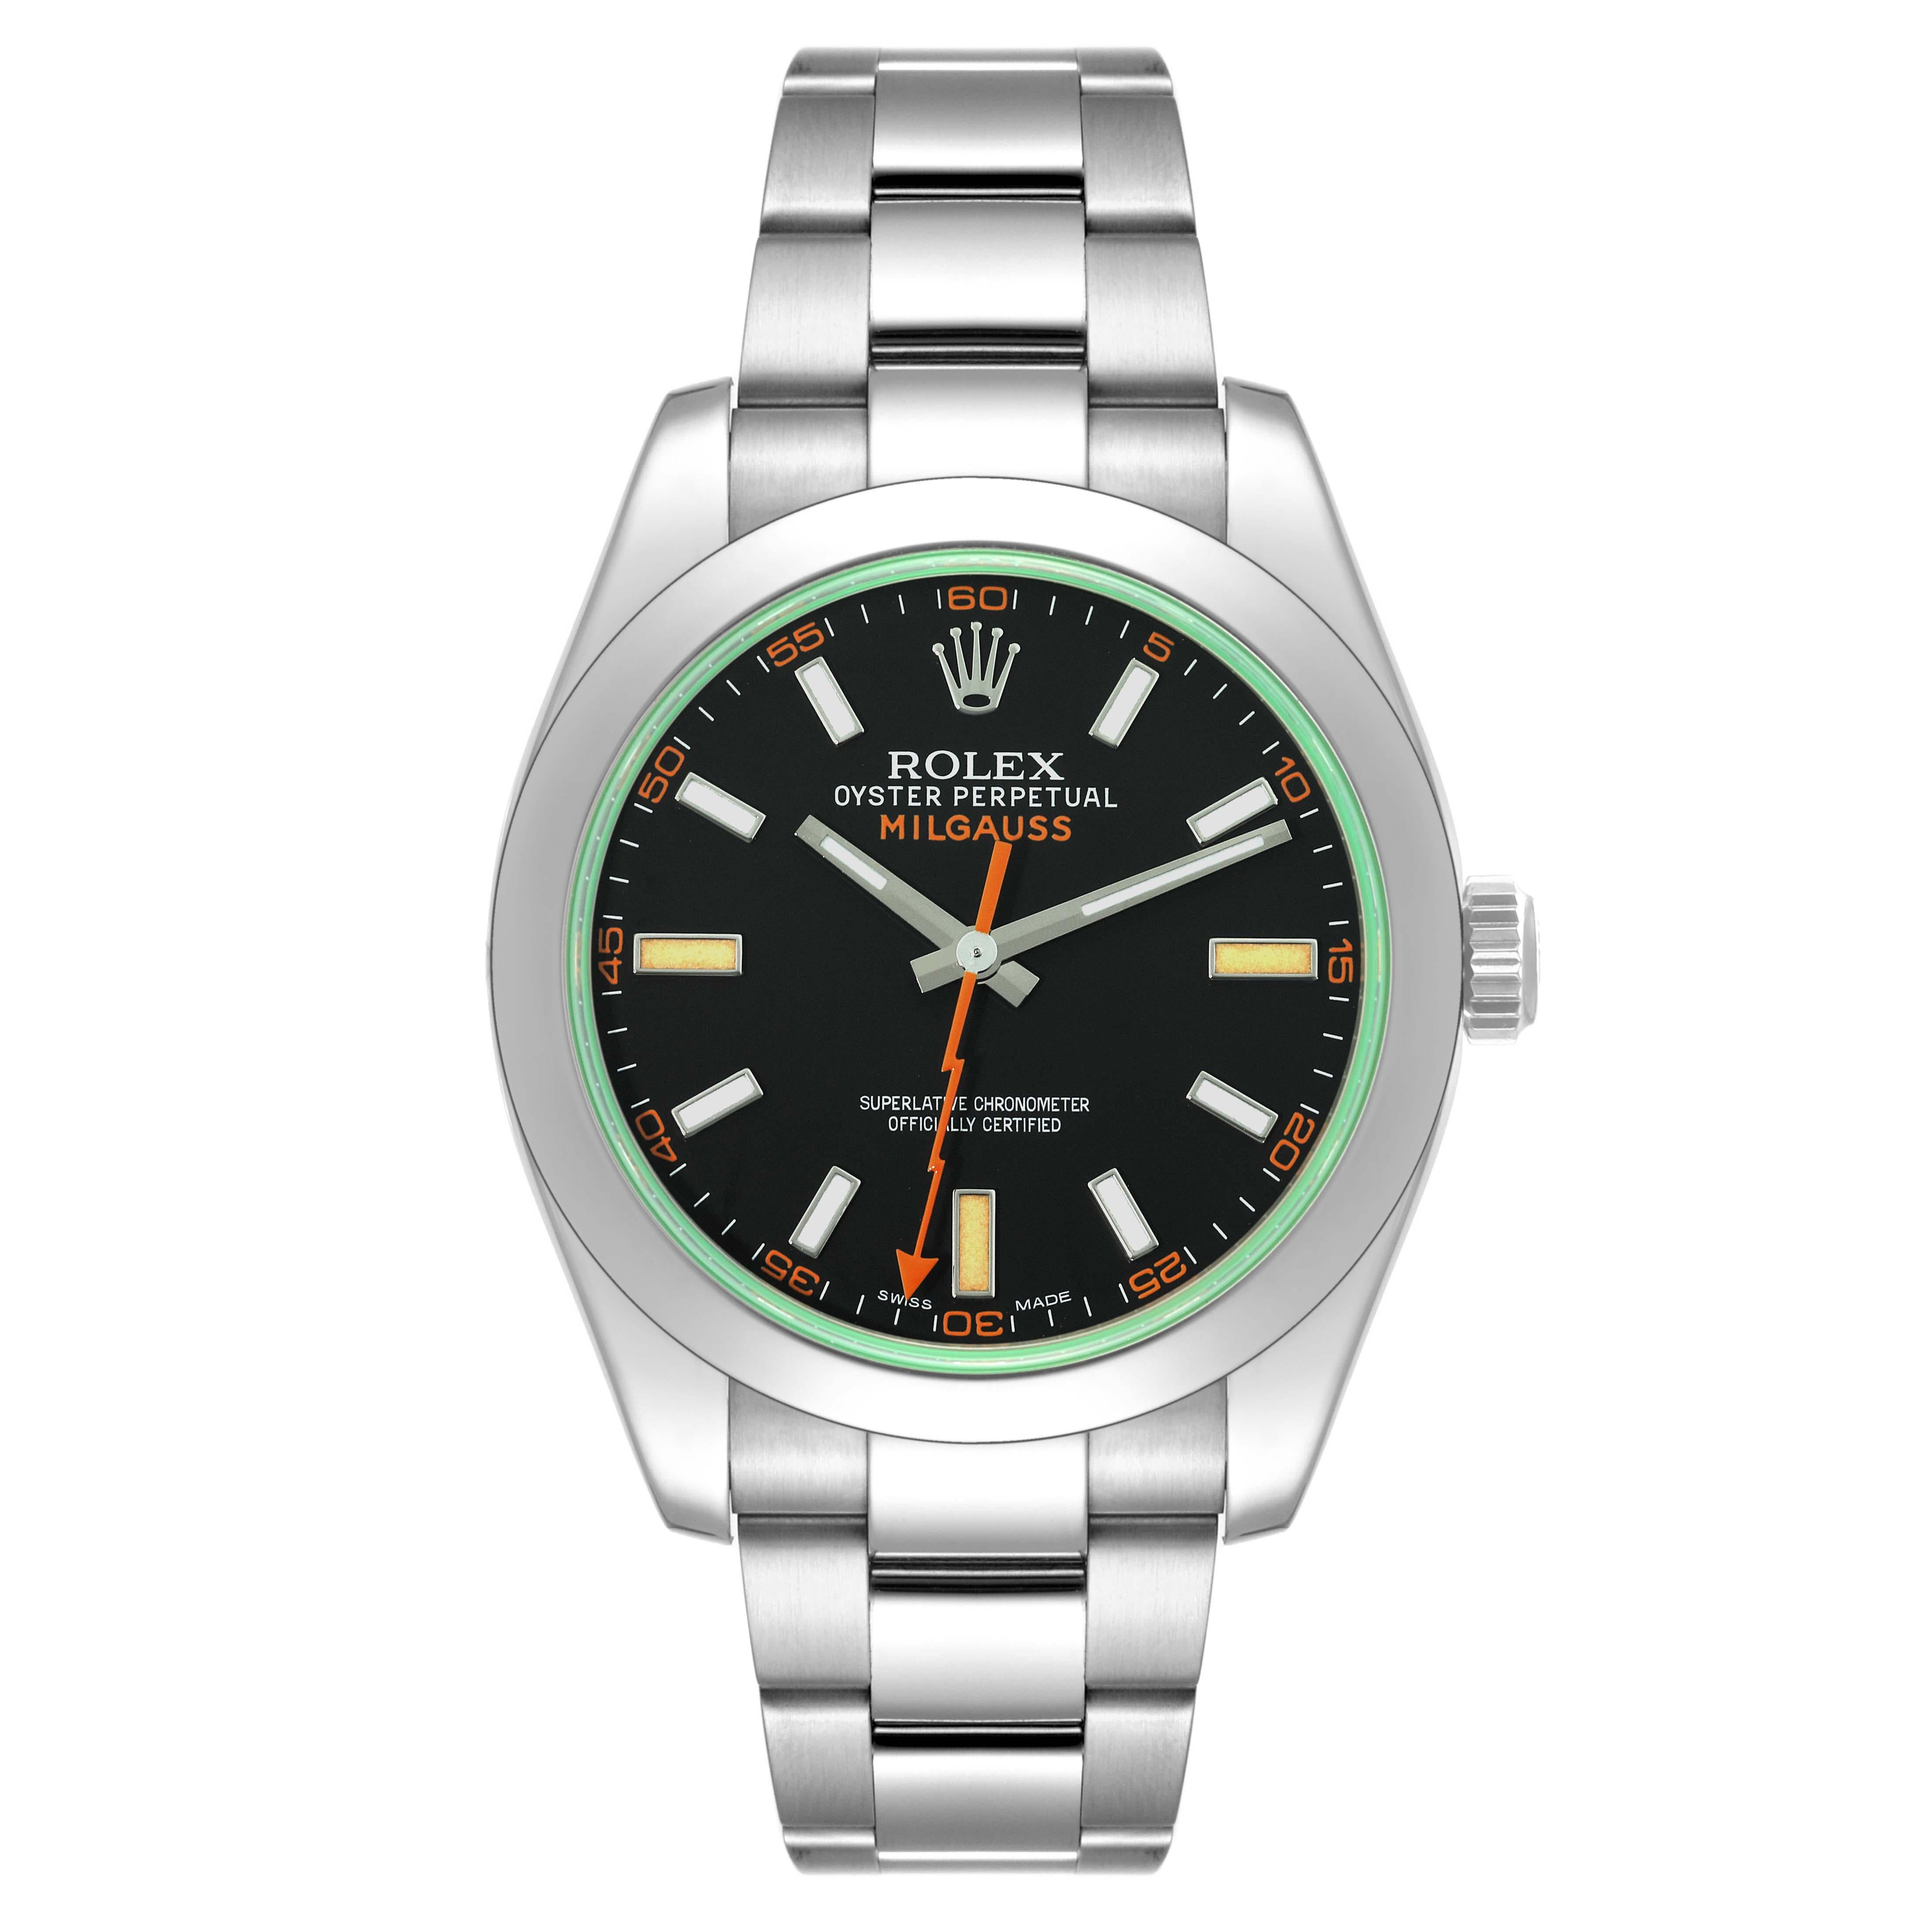 Rolex Milgauss Black Dial Green Crystal Steel Mens Watch 116400 Box Card. Officially certified chronometer automatic self-winding movement. Stainless steel case 40.0 mm in diameter. Stainless steel smooth bezel. Scratch resistant green sapphire